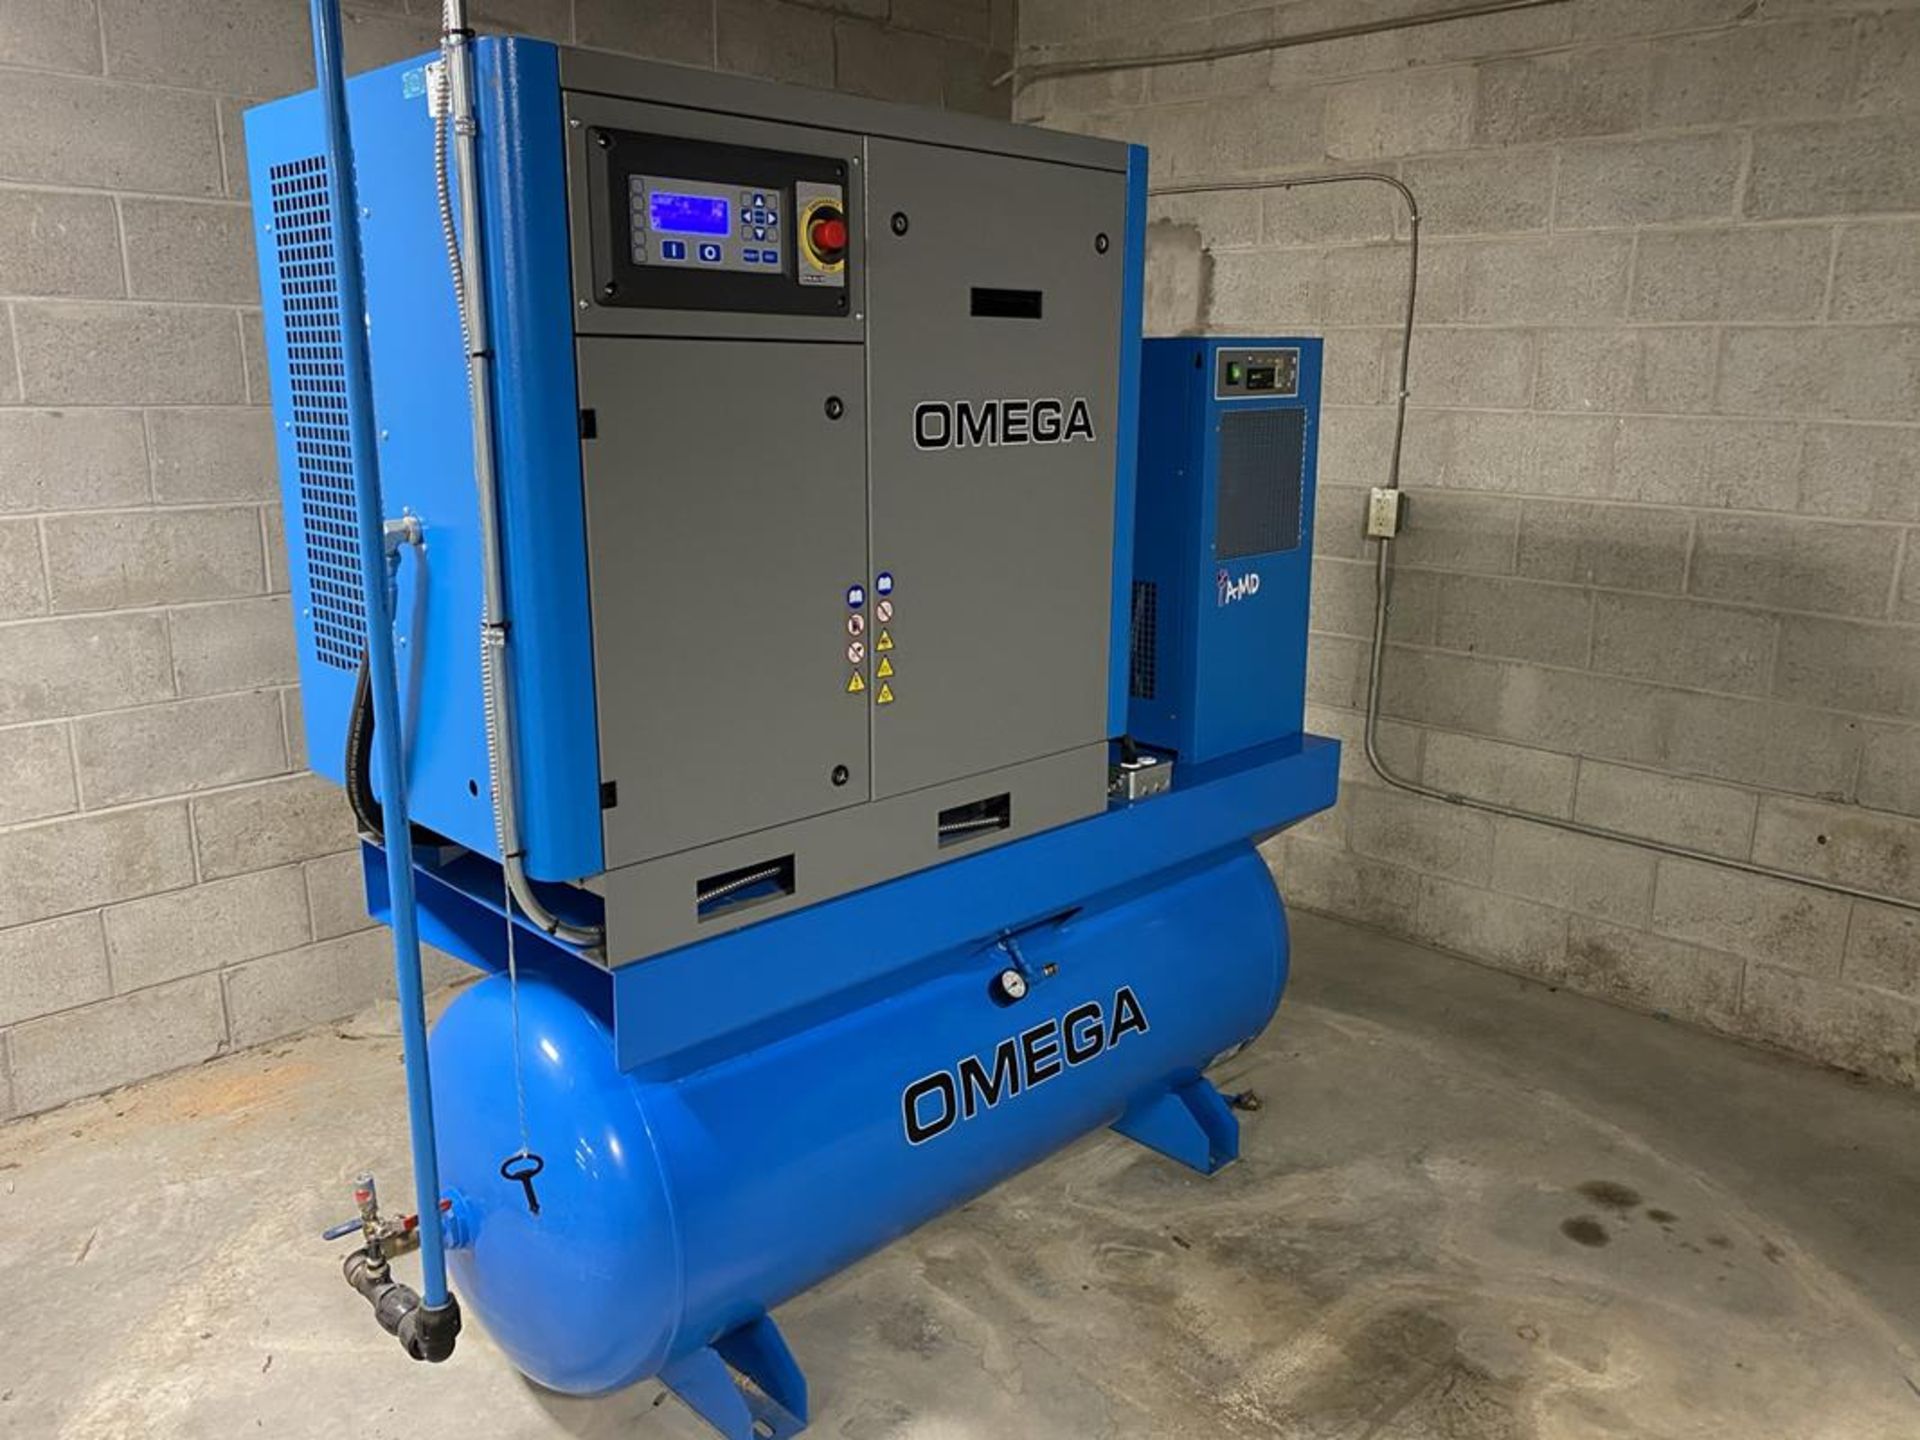 OMEGA, PS-1015-10-05-120TD, 20 HP, ROTARY SCREW AIR COMPRESSOR, 145 PSI, 2,664 HOURS, WITH AIR DRYER - Image 2 of 8